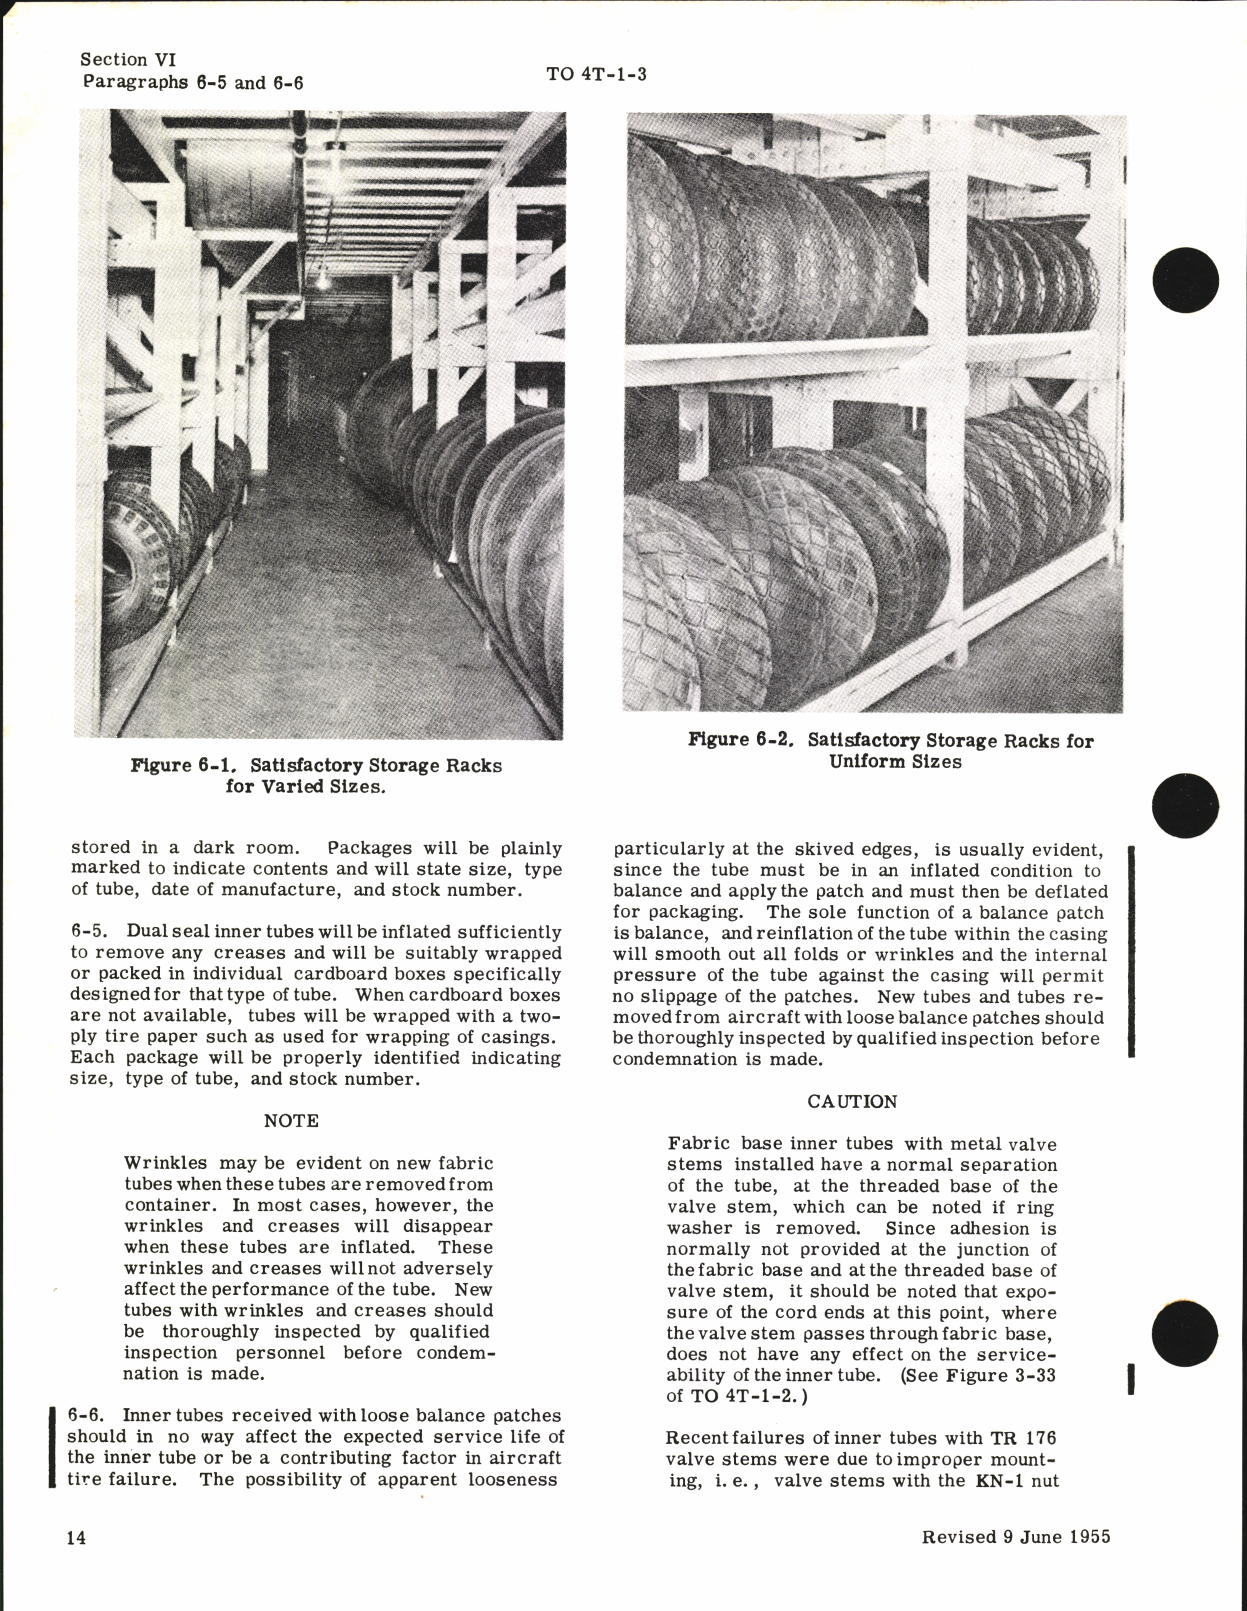 Sample page 8 from AirCorps Library document: Inspection, Maintenance, Storage, and Disposition of Aircraft Tire Casings and Inner Tubes